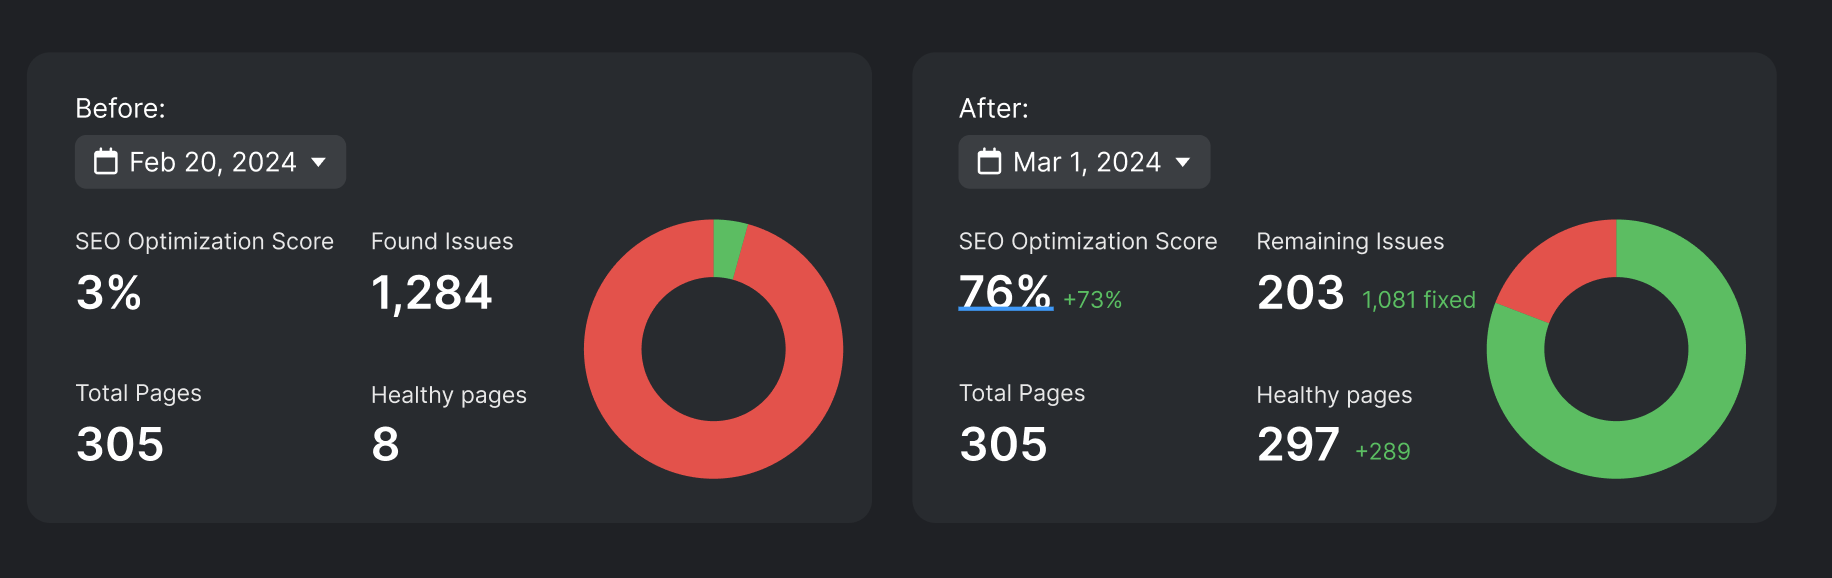 Comparison of onpage audit scores before and after, showing significant improvement from 3% to 76%, with a decrease in found issues and an increase in healthy pages.